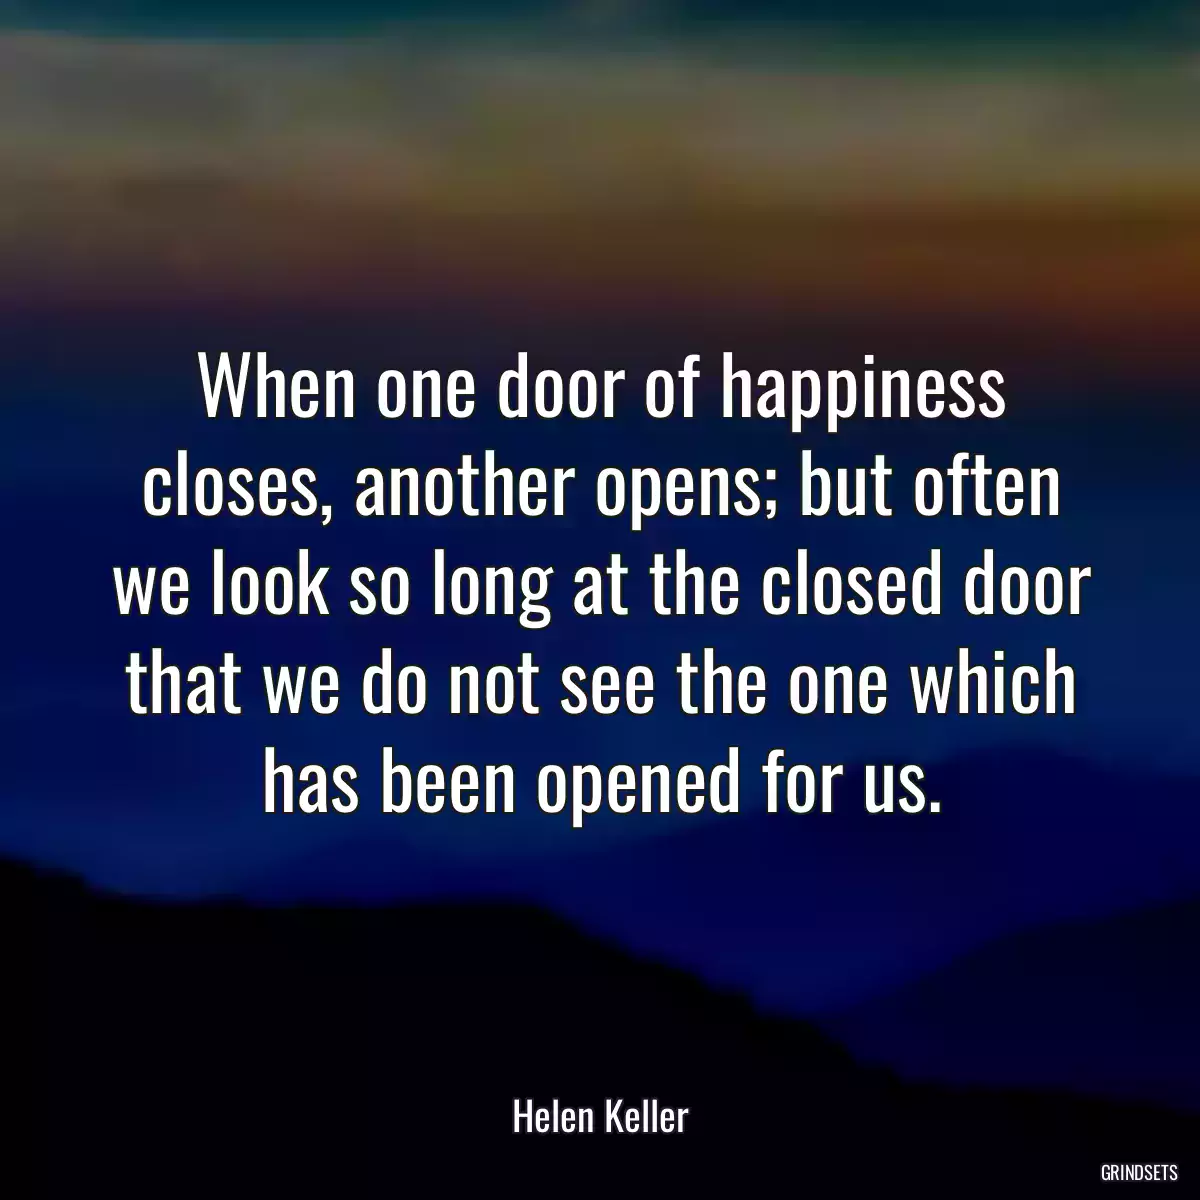 When one door of happiness closes, another opens; but often we look so long at the closed door that we do not see the one which has been opened for us.